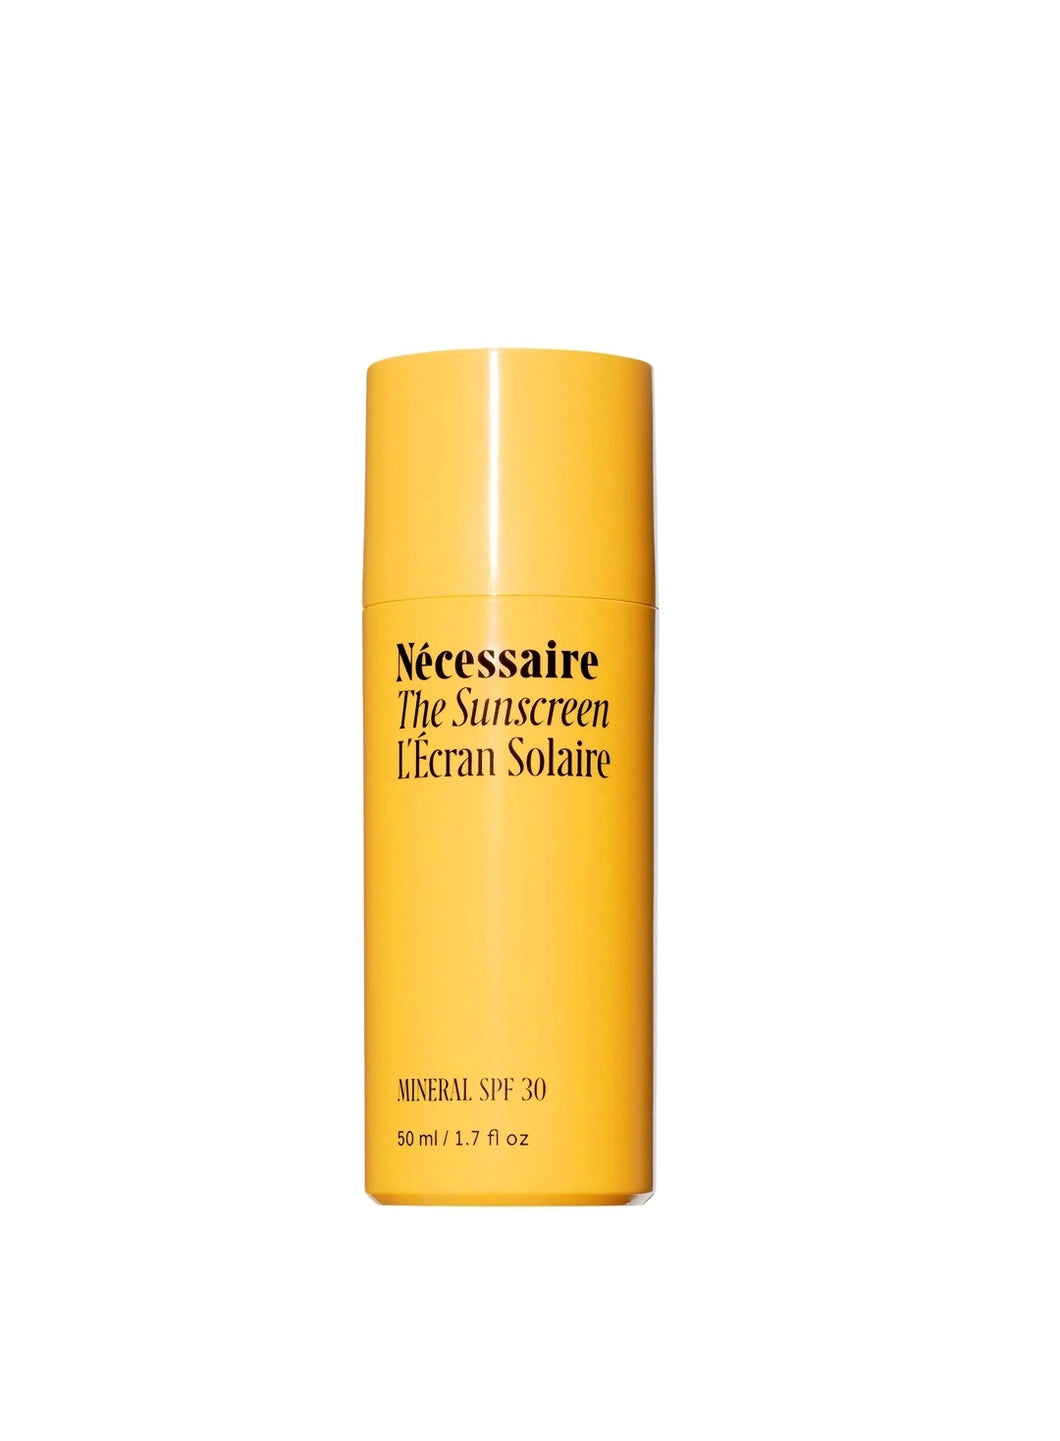 The Sunscreen - 100% Mineral, Broad Spectrum SPF 30 with 20% Non-Nano Zinc, Hyaluronic Acid and Niacinamide